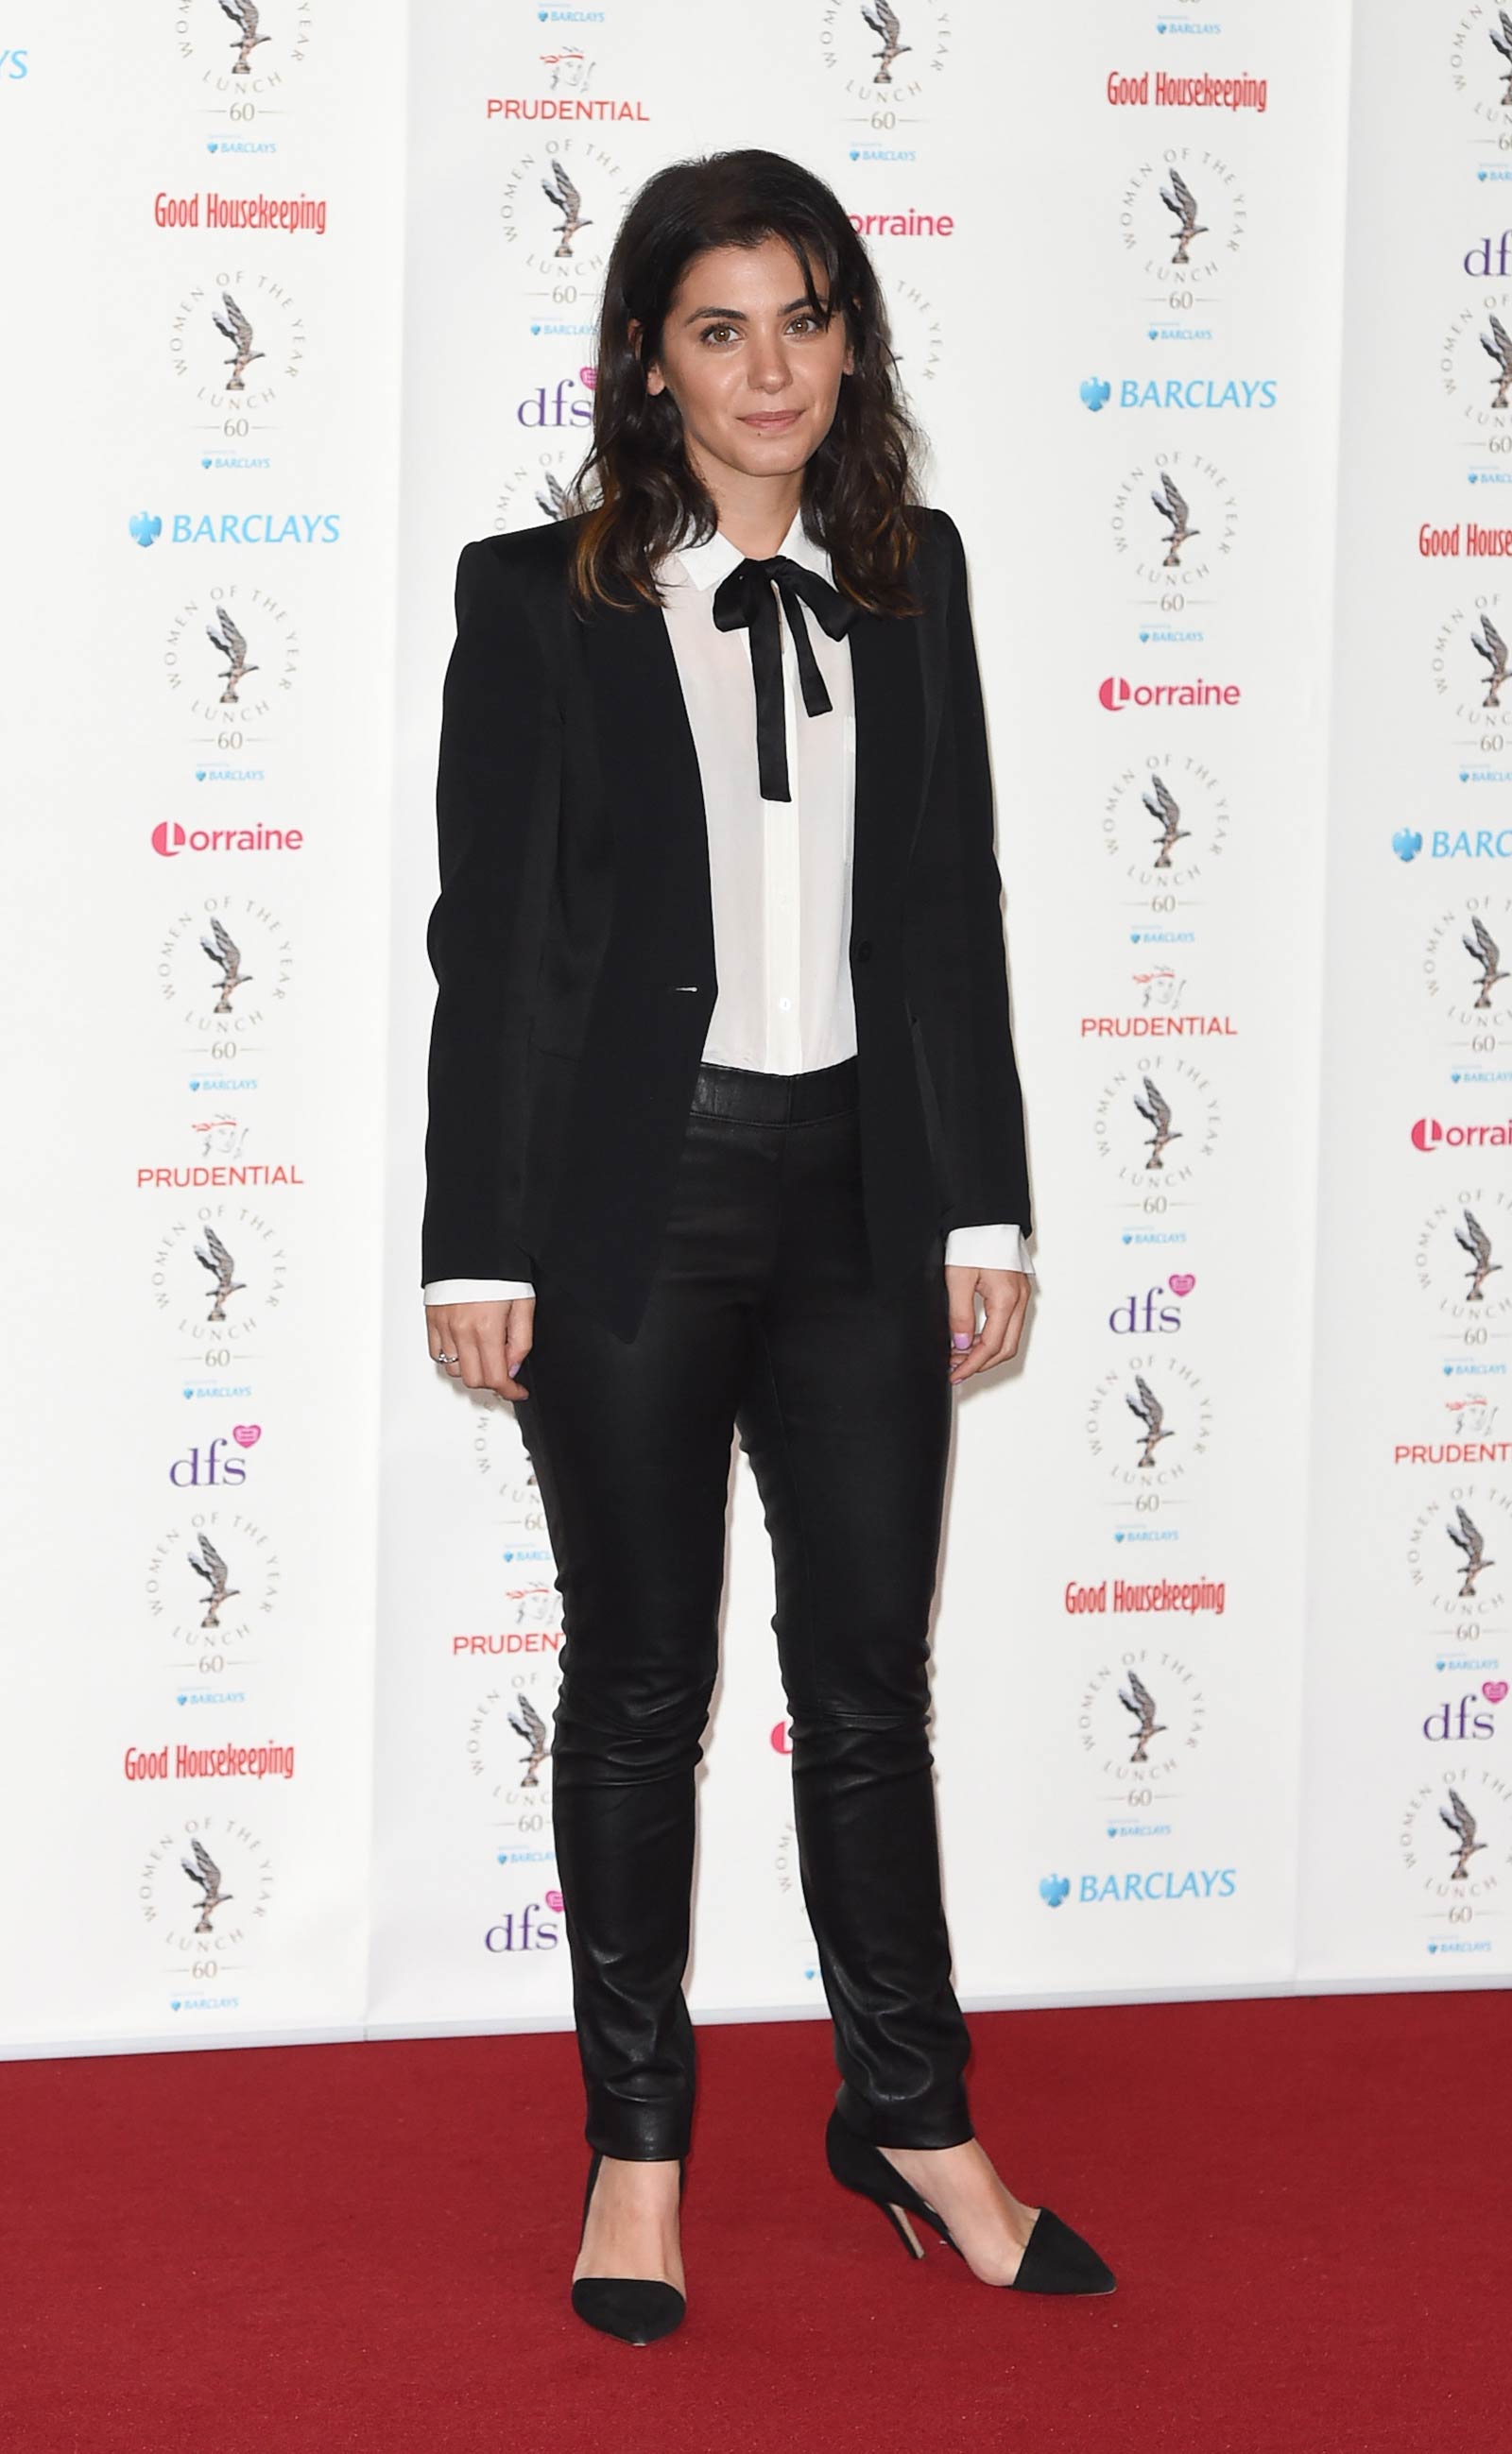 Katie Melua attends Women of the Year lunch and awards